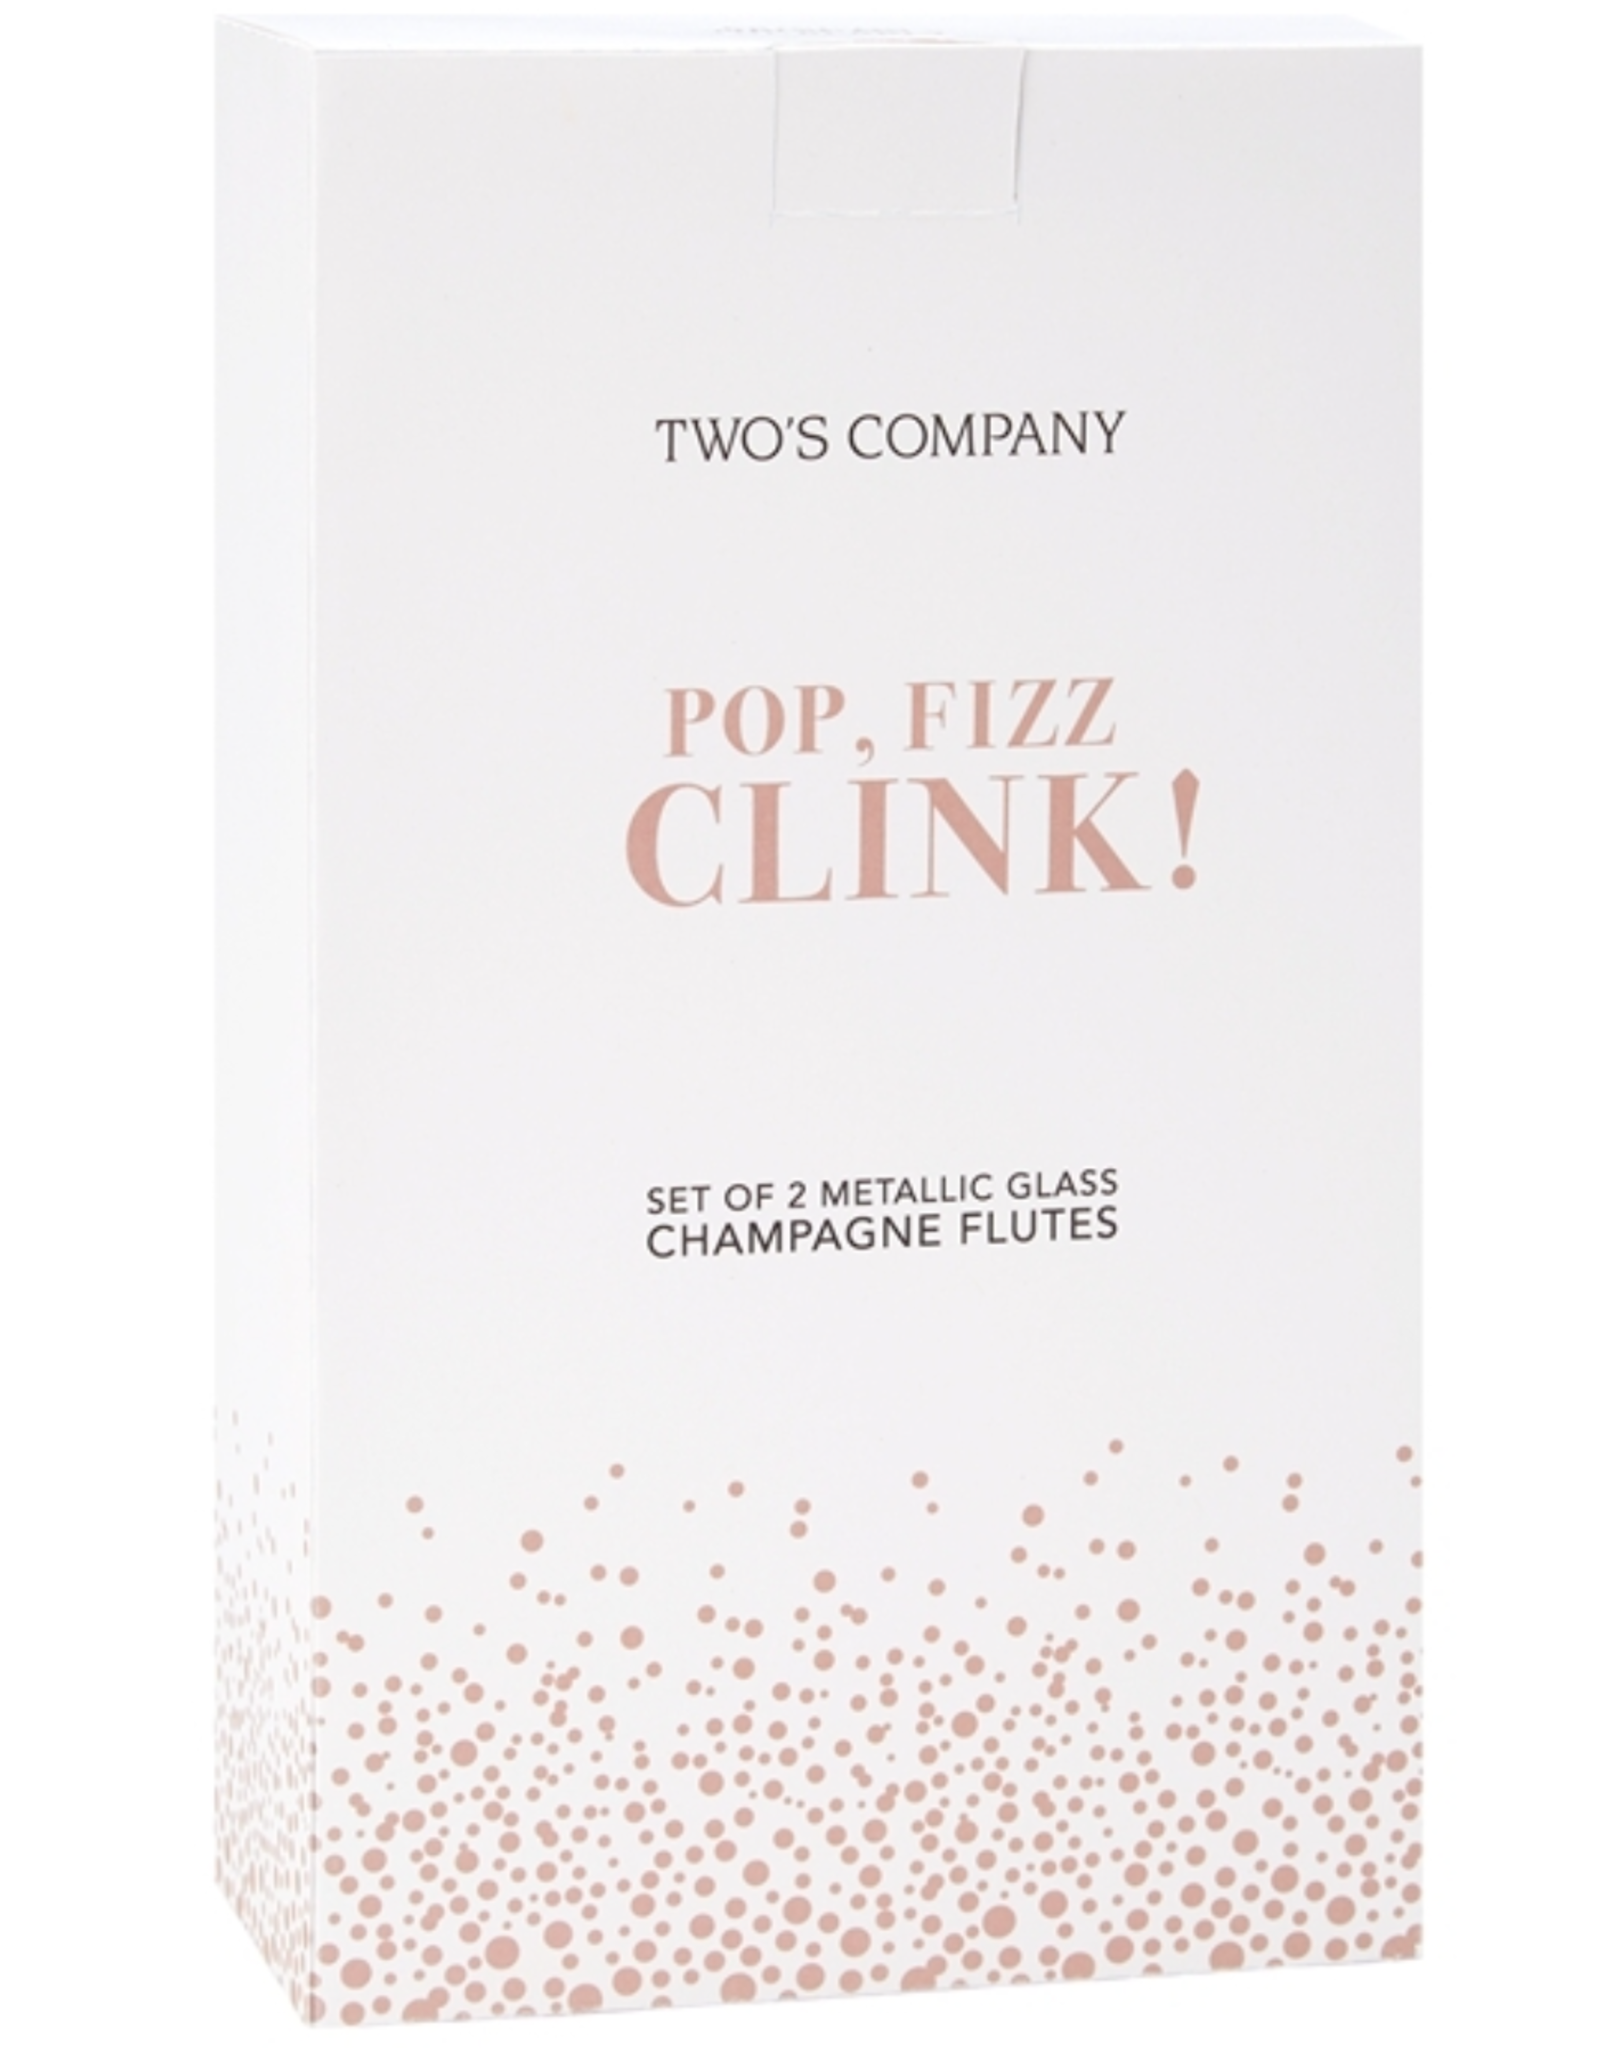 6oz Champagne Flute Cheers Rose Gold